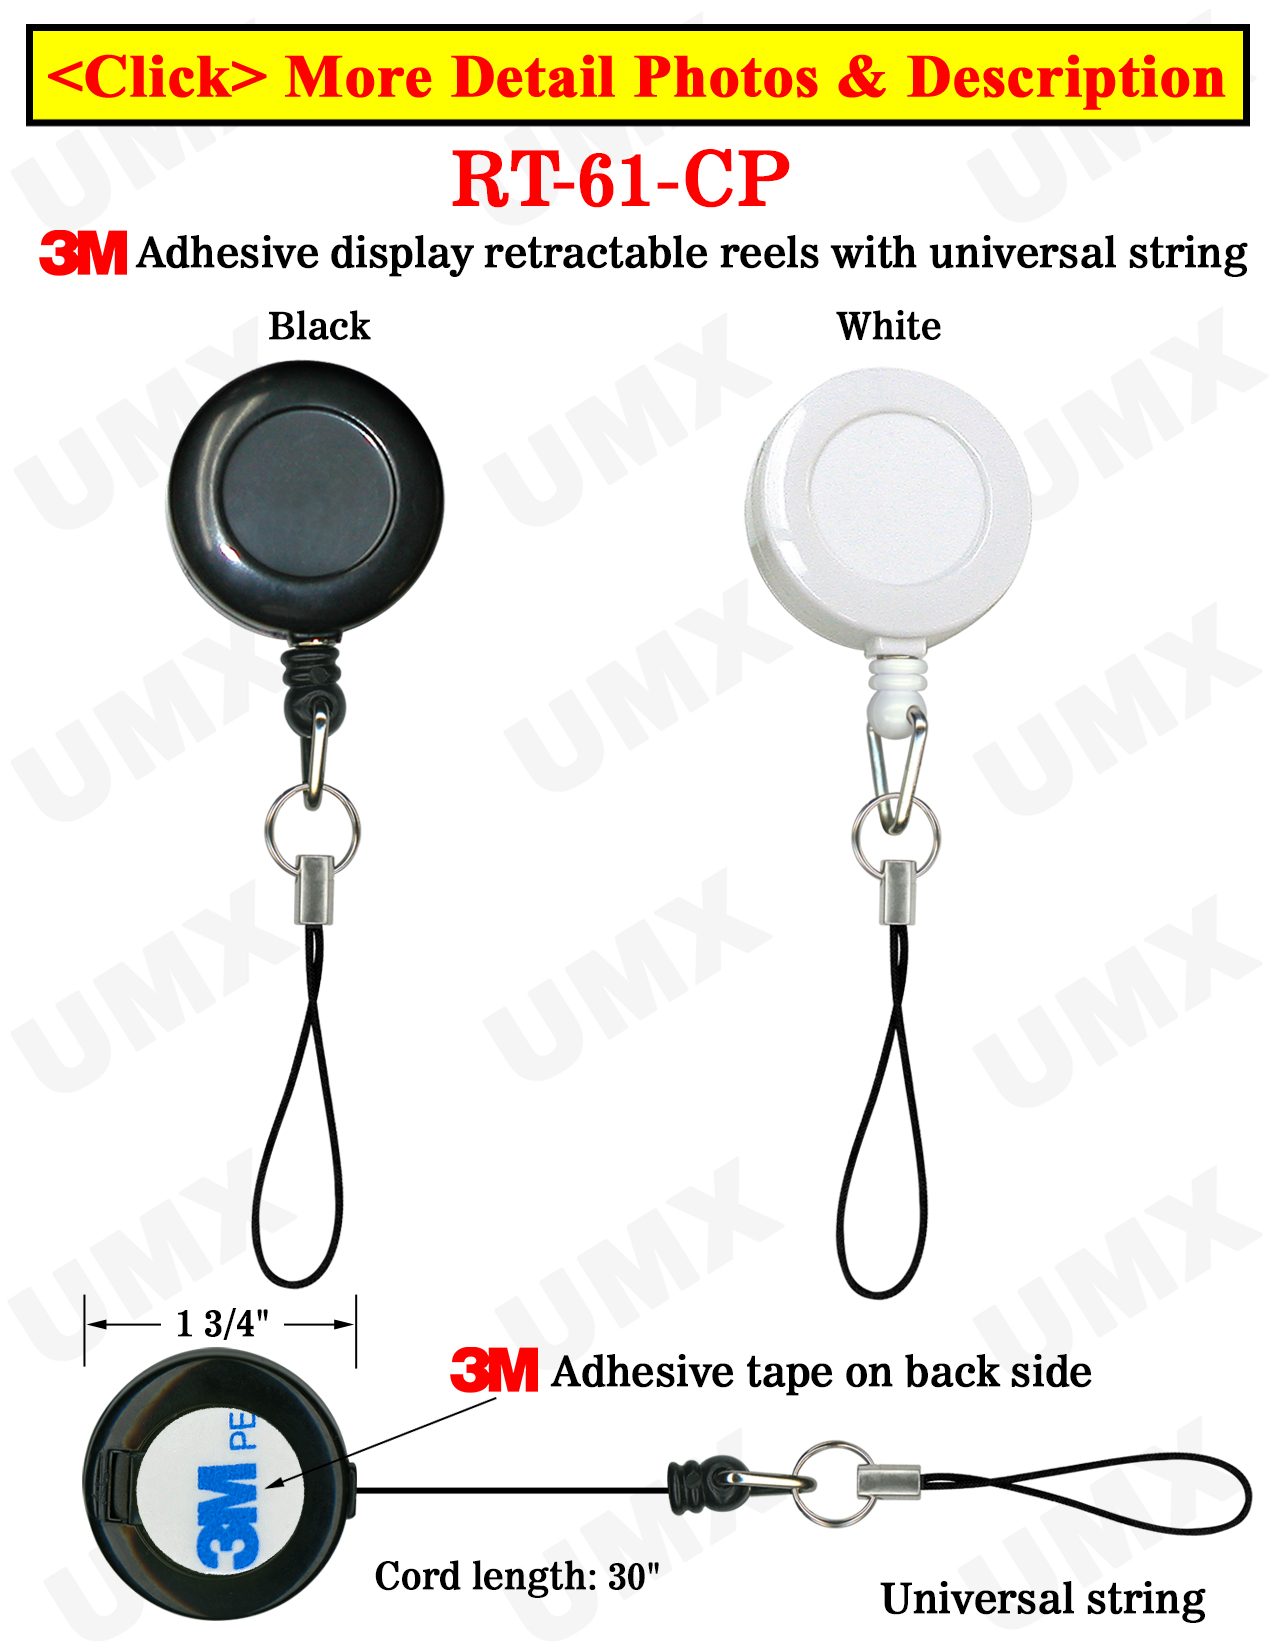 Low Cost Special Event Display Retractable Event Display Reels With Universal Strings and Adhesive Backing